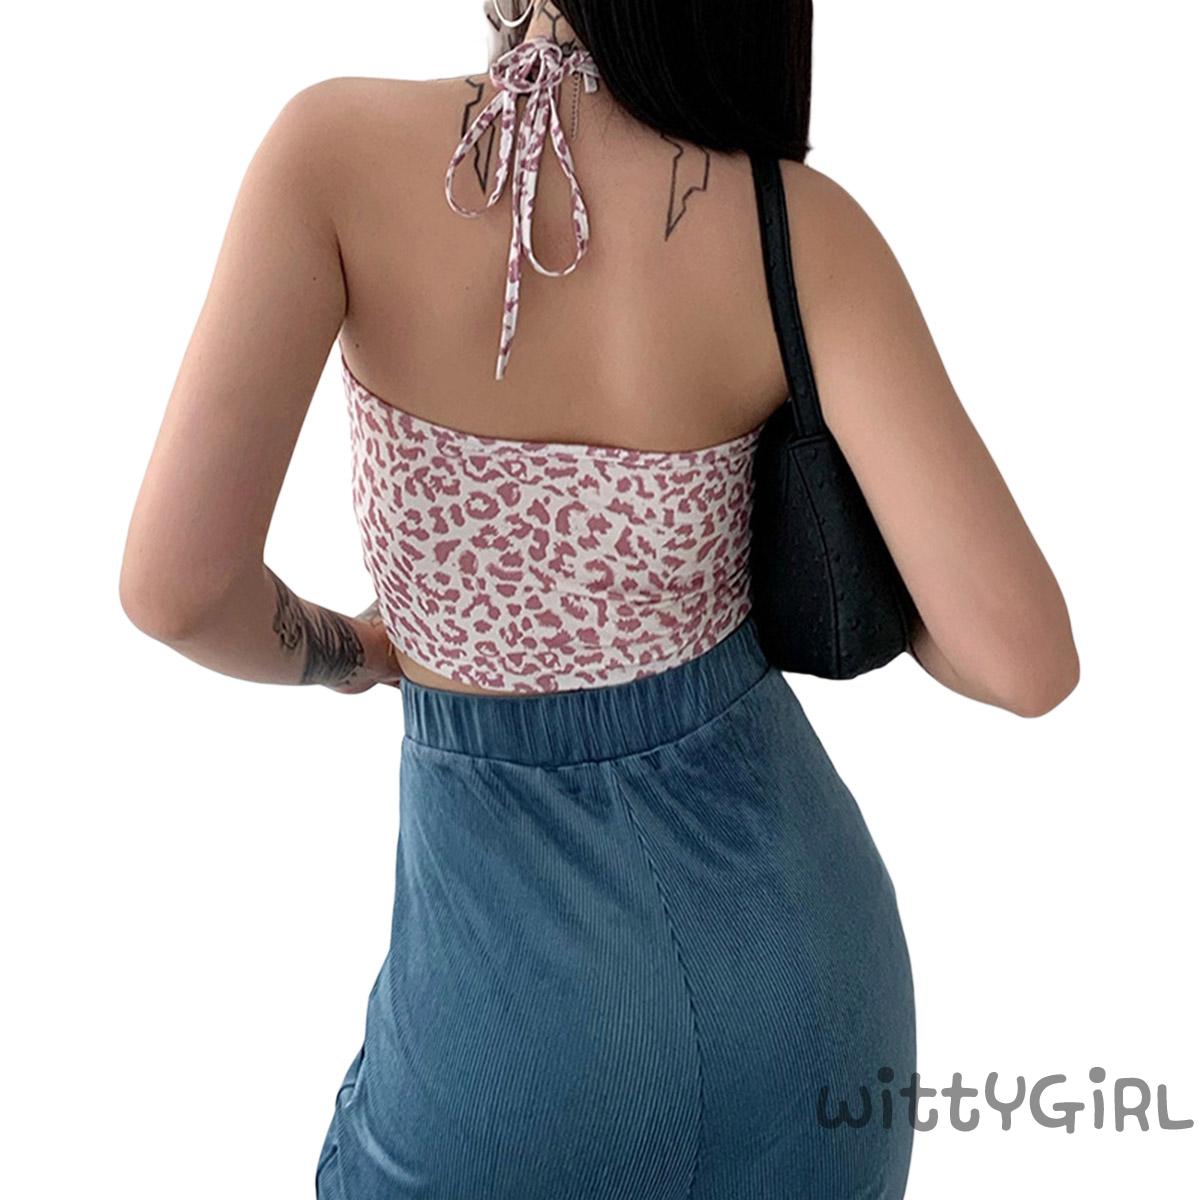 W[]-Women´s Leopard Print Camisole Summer Fashion Sexy V-Neck Halter Lace Up Cropped Top | BigBuy360 - bigbuy360.vn